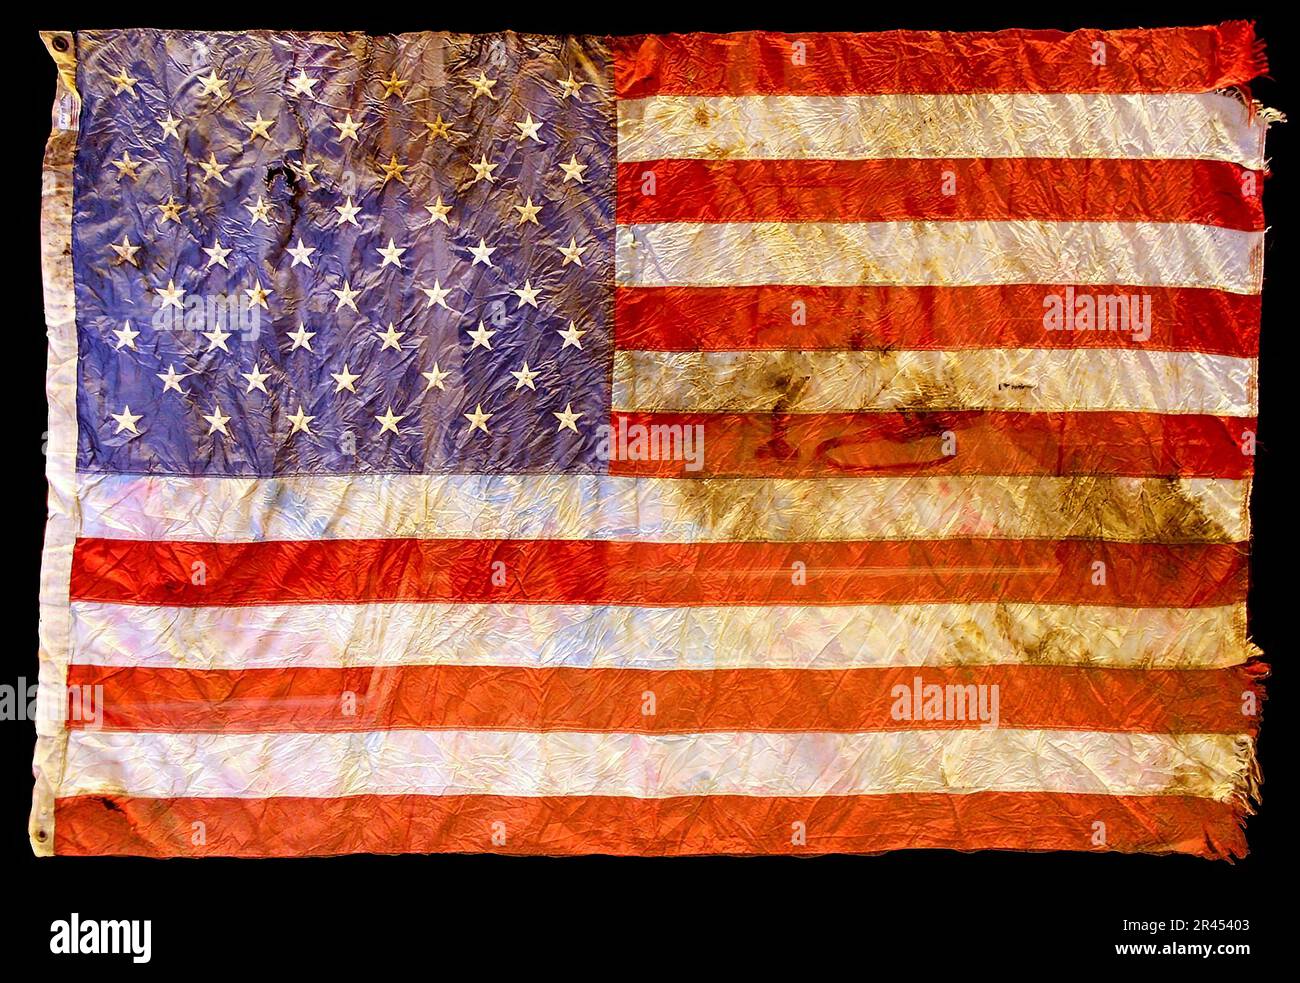 The United States flag from Ground Zero on 9/11. The September 11, 2001 terrorist attacks were the most lethal terrorist attack in history, taking the lives of 3,000 Americans and international citizens and ultimately leading to far-reaching changes in anti-terror approaches and operation in the U.S. and around the globe. Galvanized by the unprecedented terrorist attack, the FBI responded in an unprecedented fashion. Stock Photo